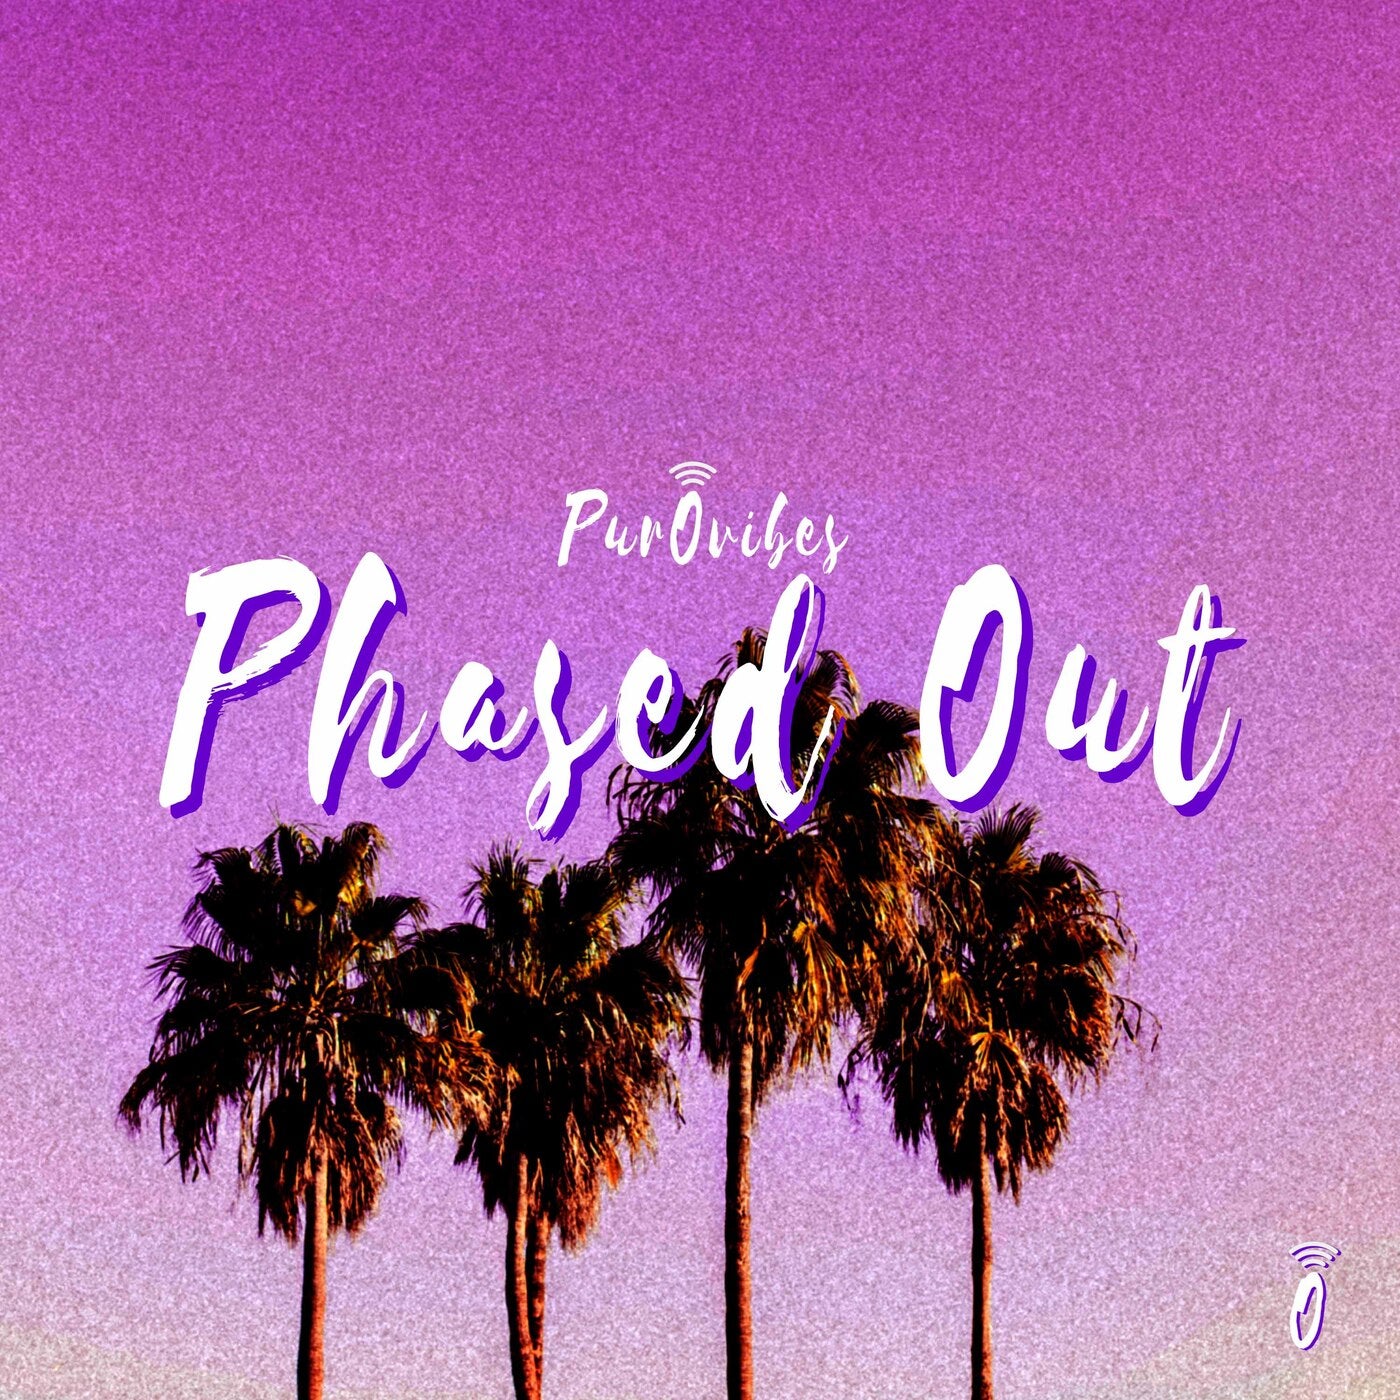 Bonway - Phased Out [PurOvibes]